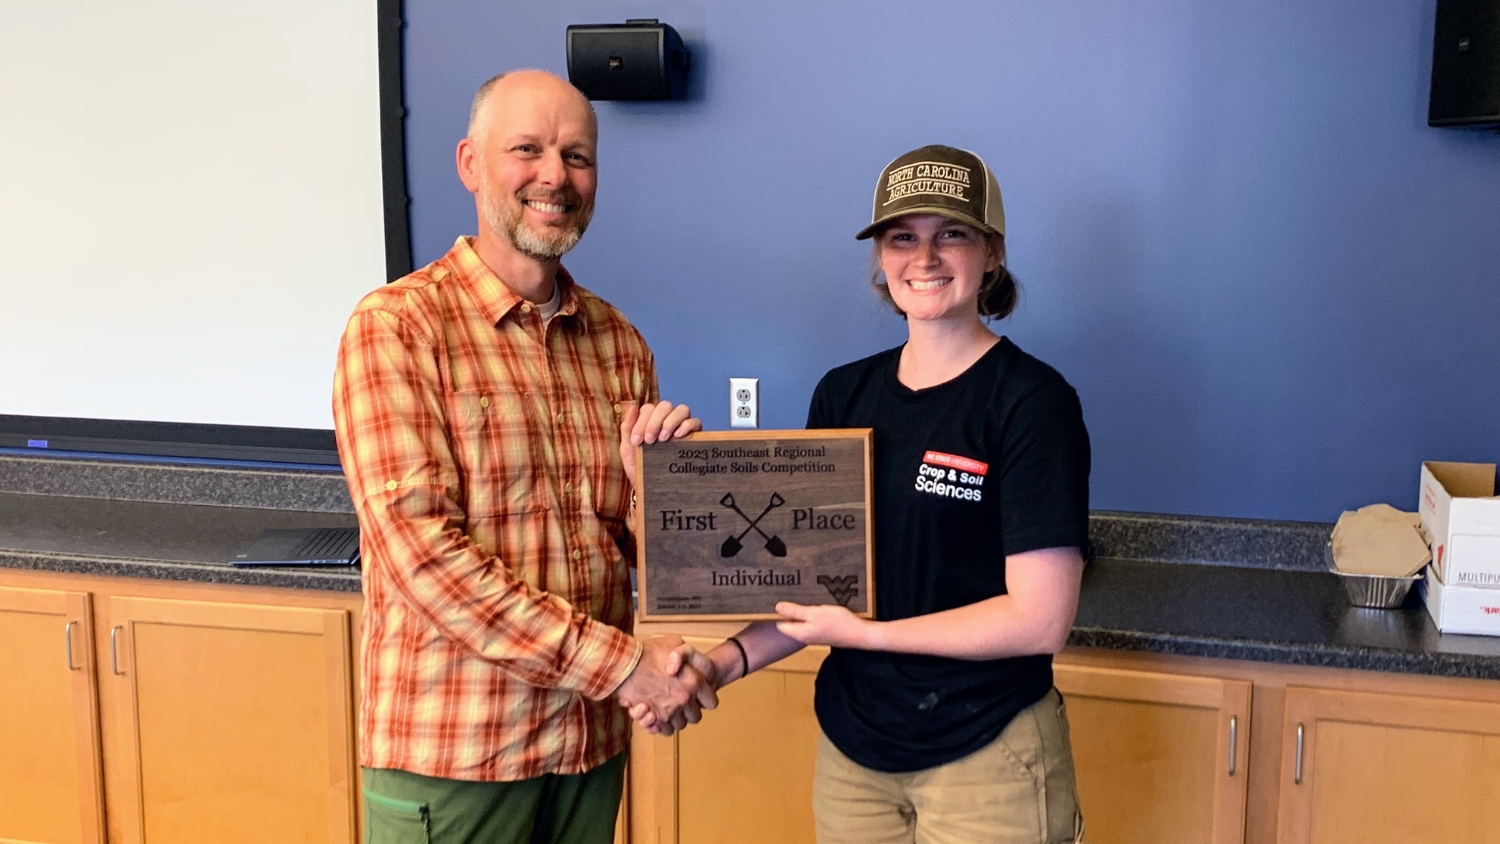 NC State freshman Sarah Bailey accepts a first place award at the 2023 Eastern Collegiate Soil Judging Competition.